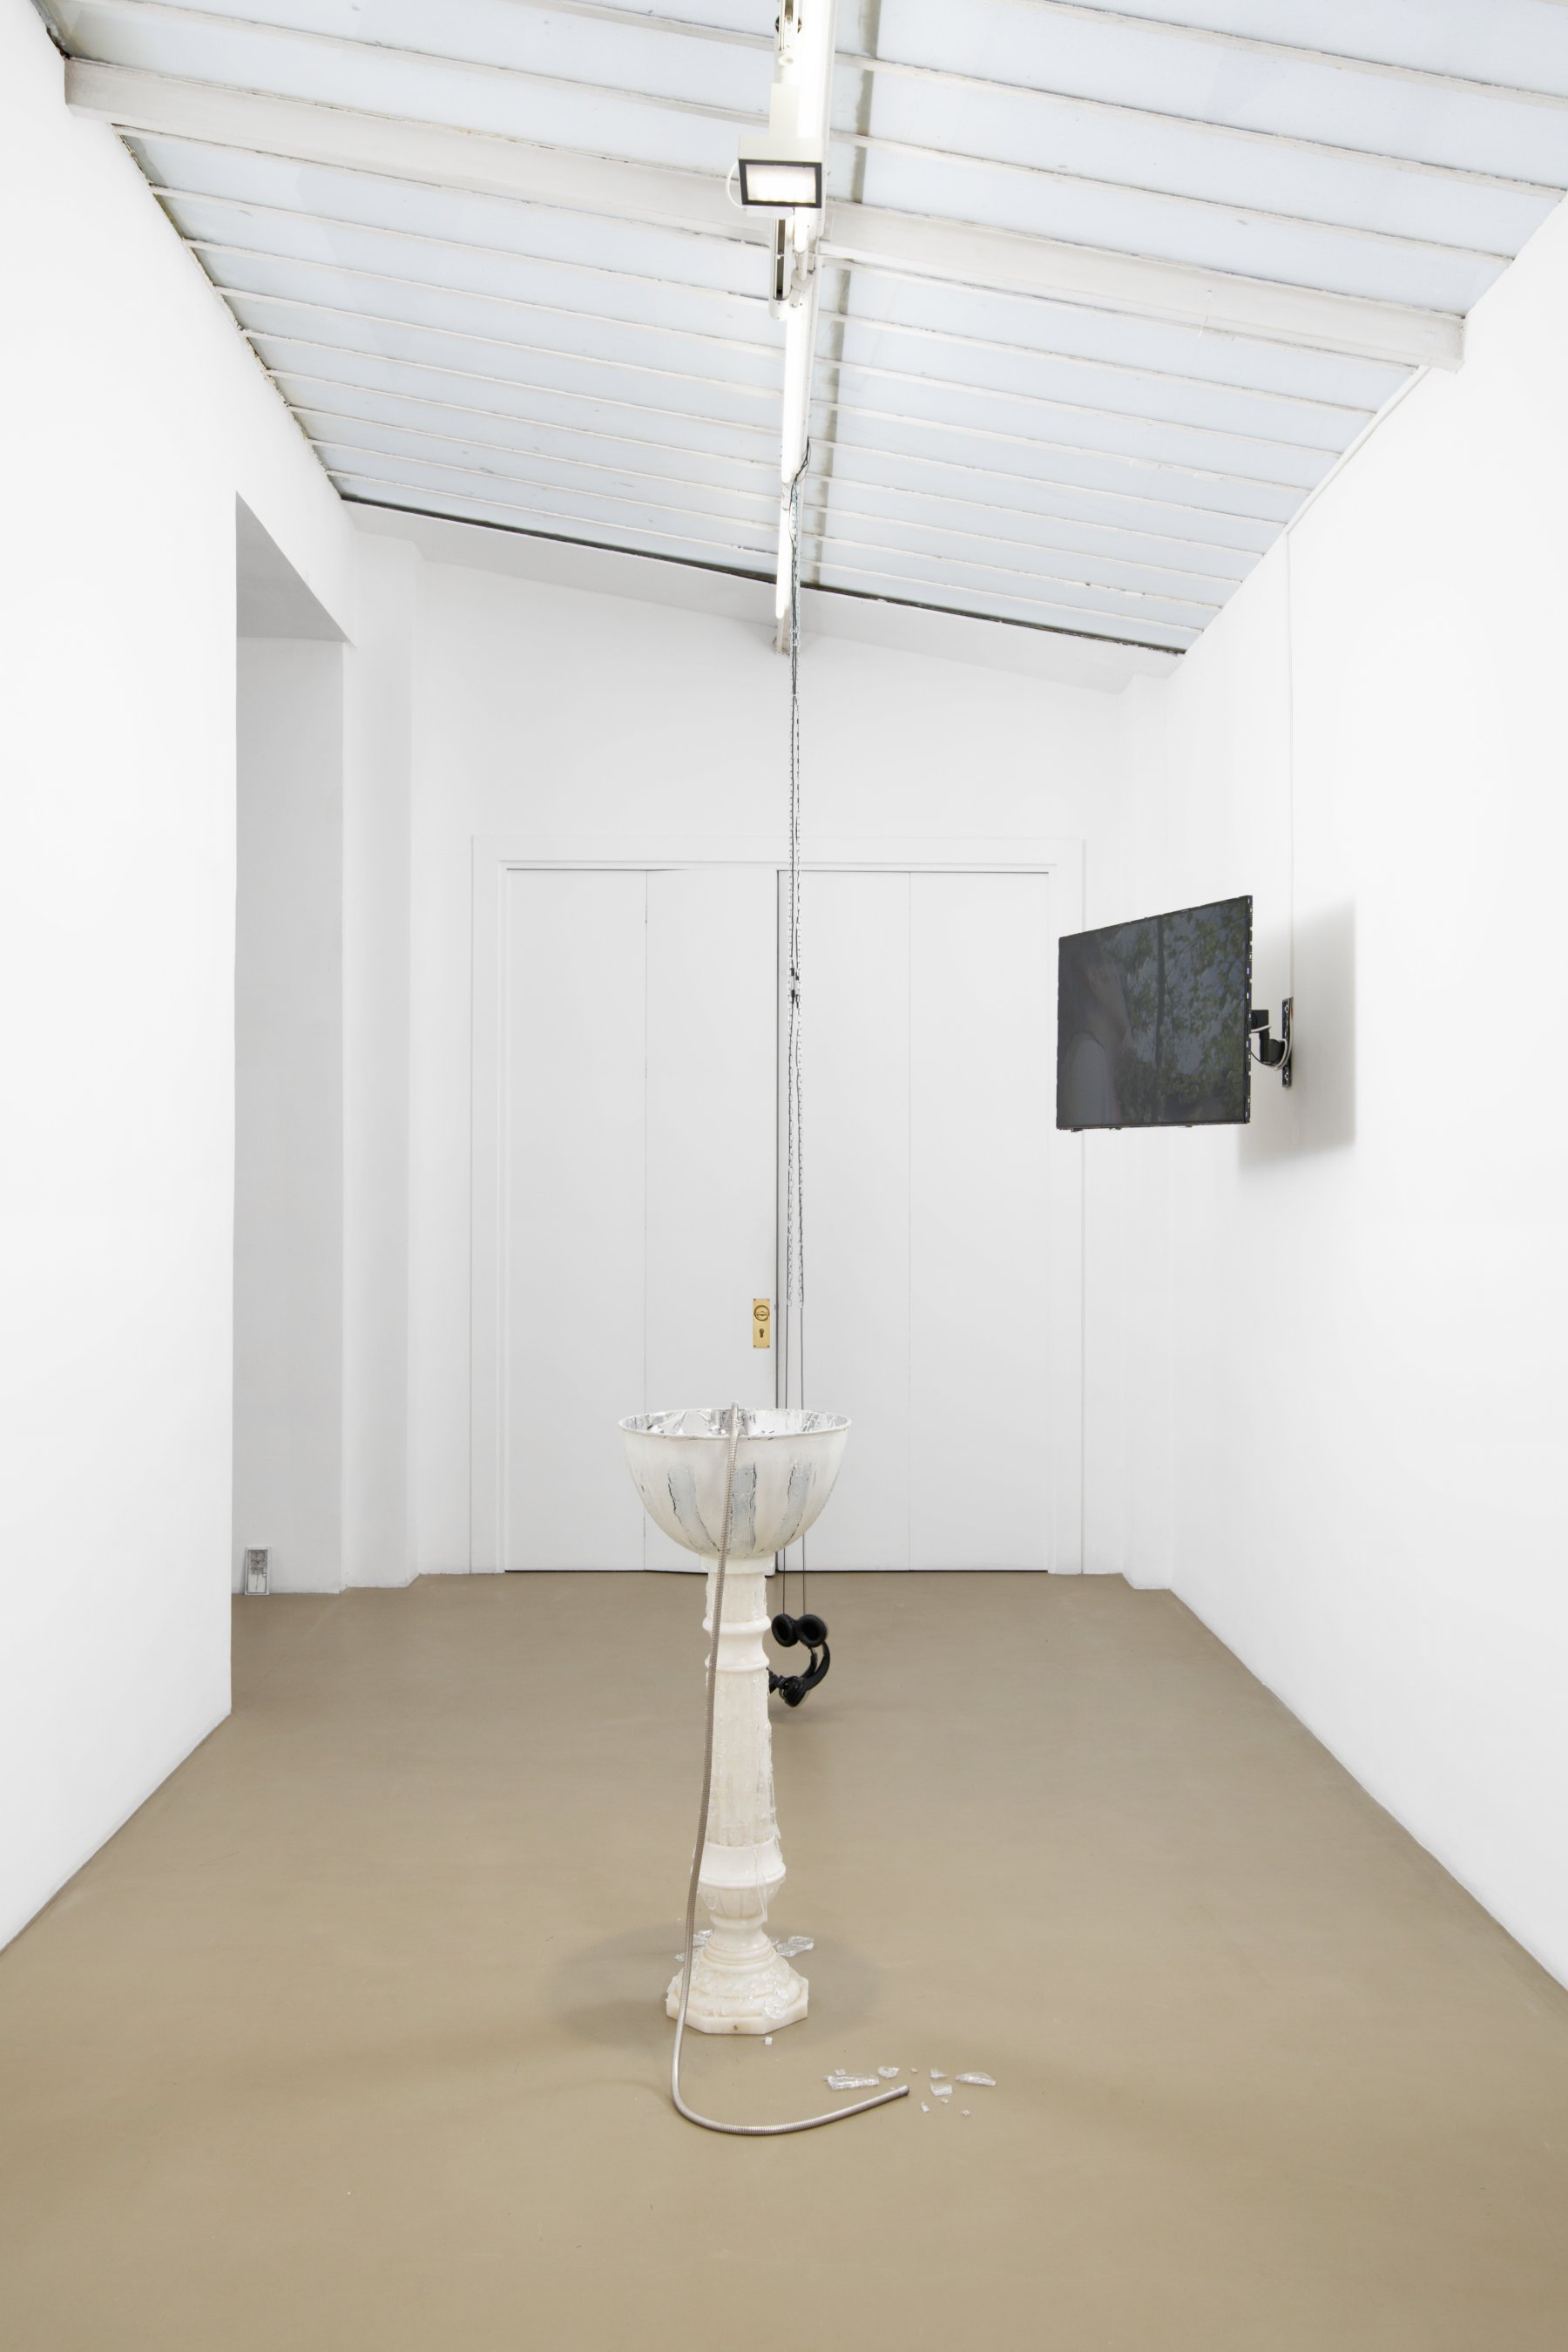 Installation image for Tous les jours, at Galerie Chantal Crousel